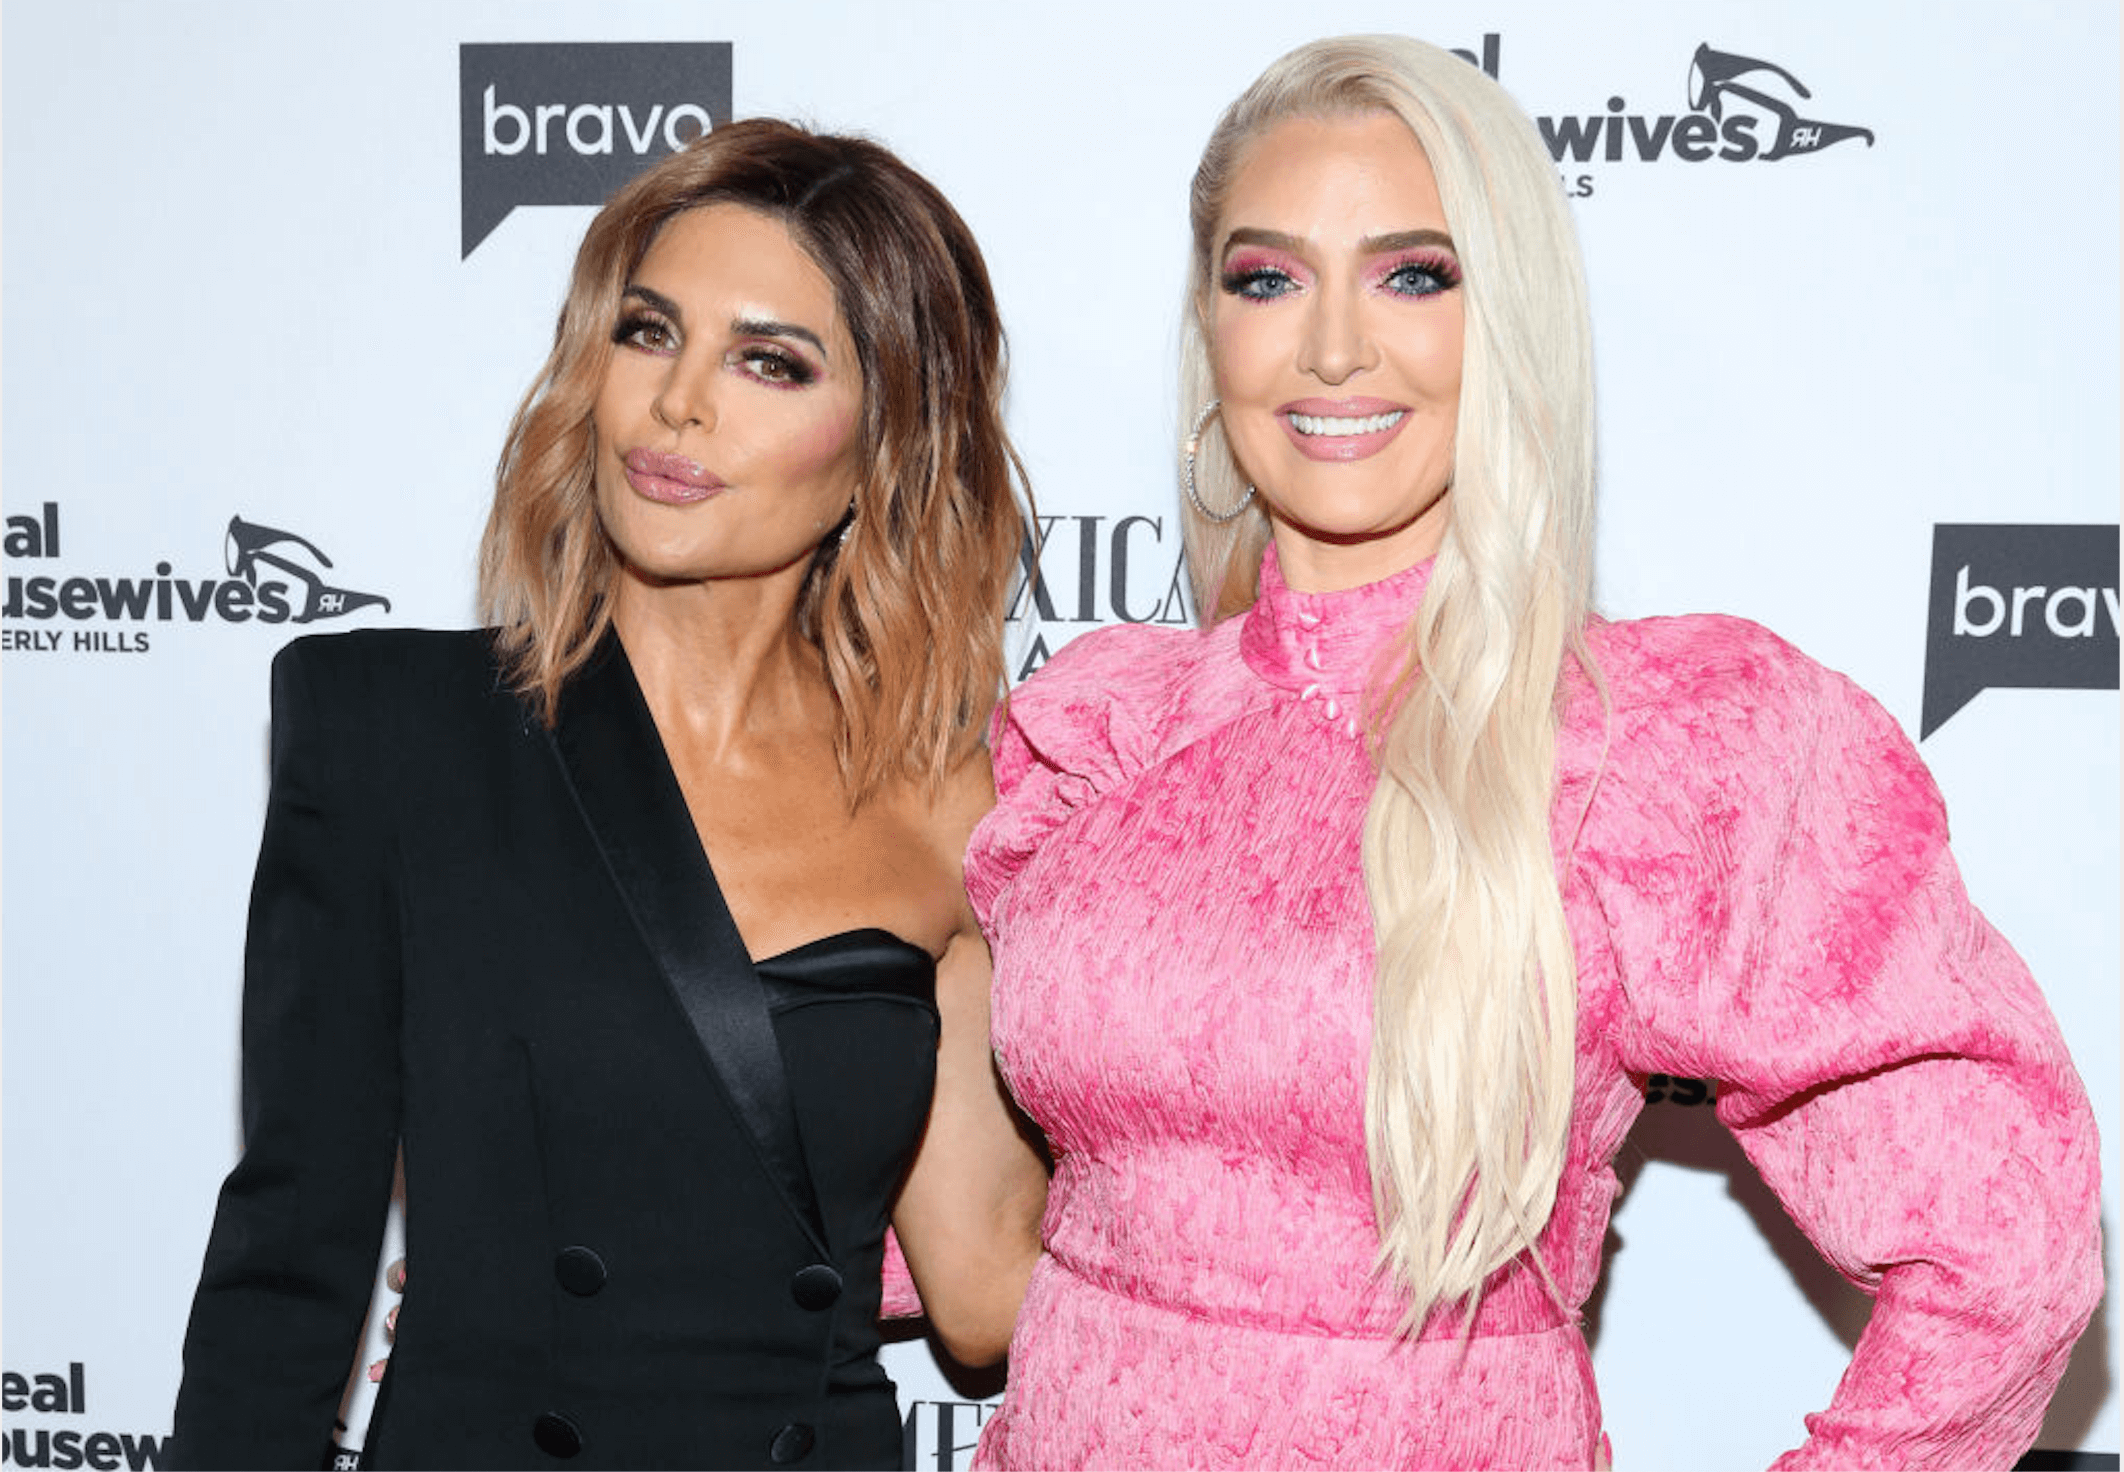 Lisa Rinna Says ‘You Better Believe’ Erika Jayne Will Open Up About Divorce On New Season Of ‘RHOBH’!